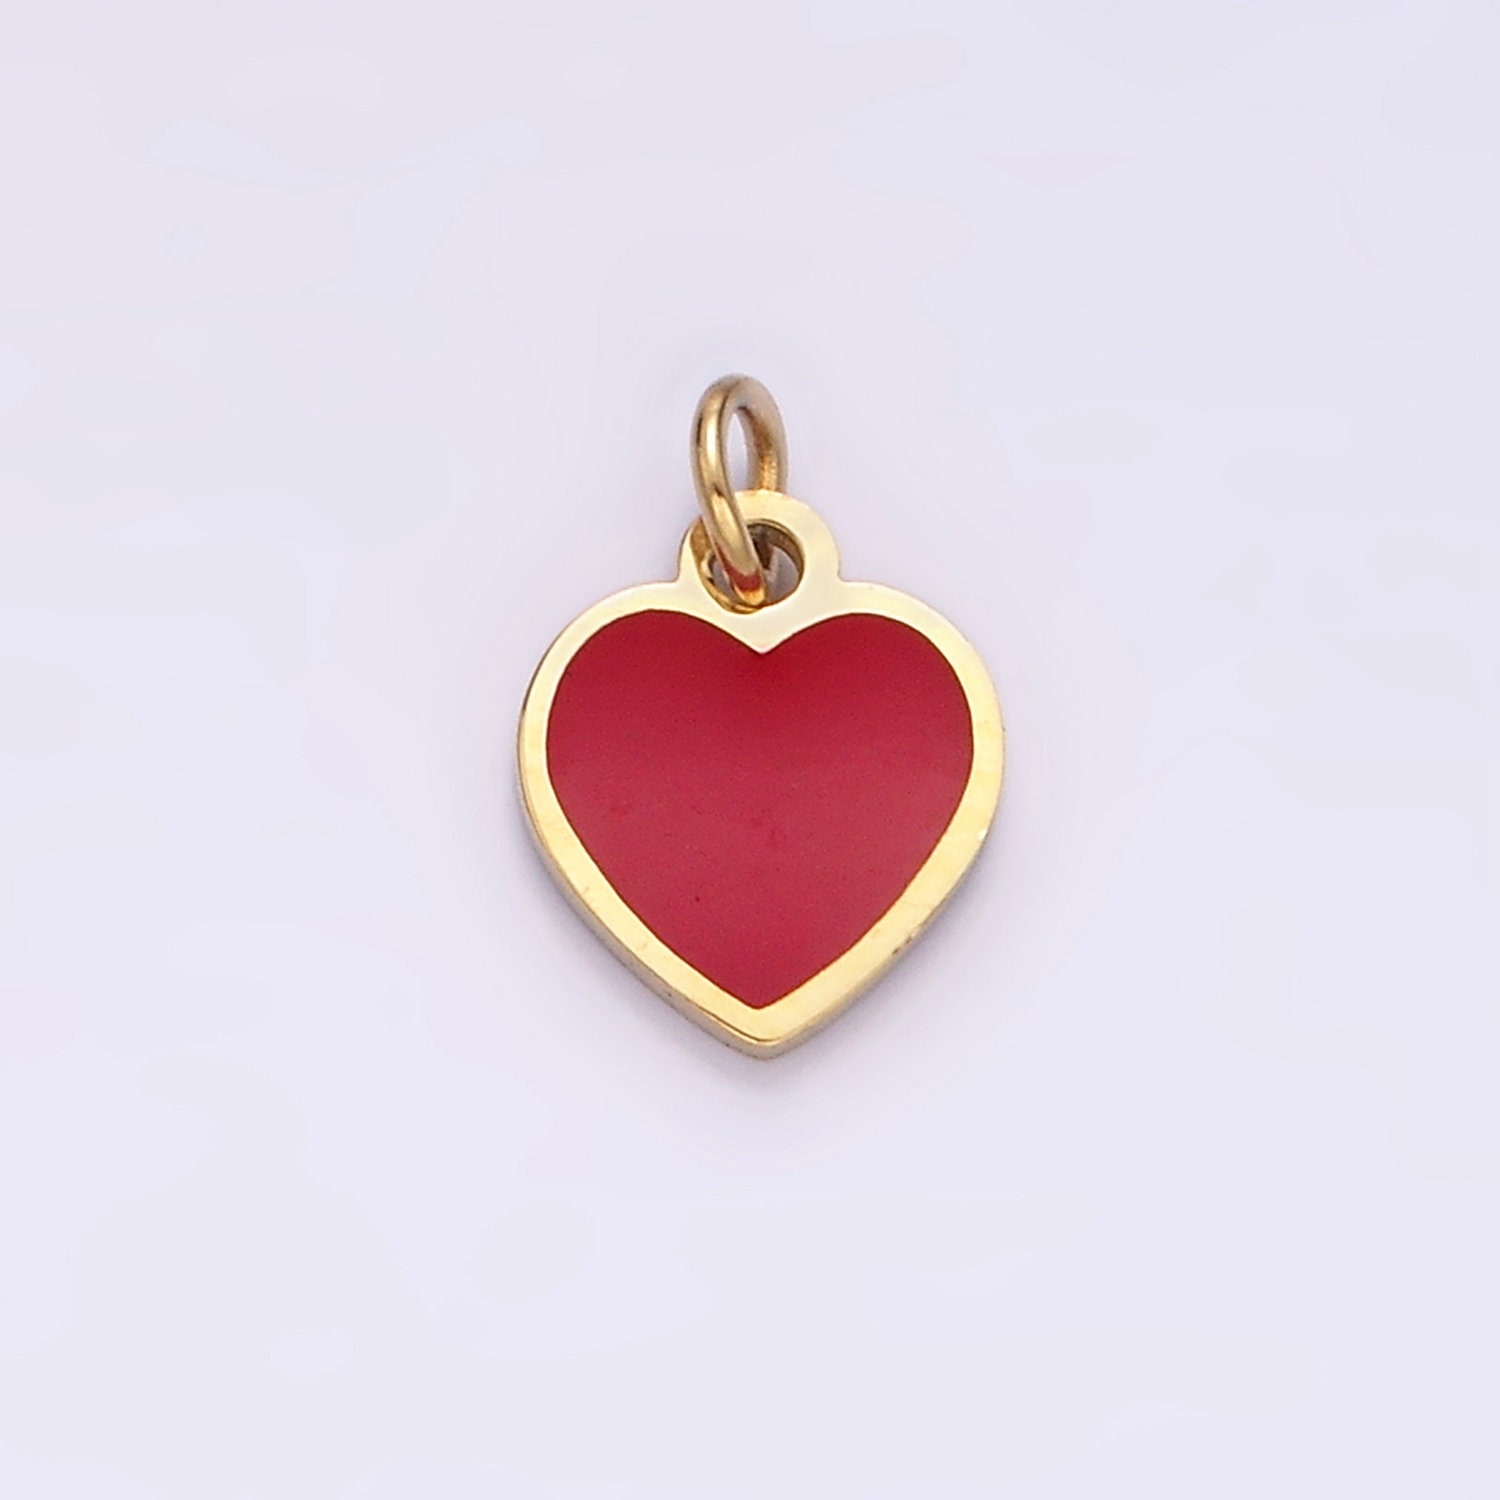 Enamel Heart Charms, Red Heart Charms, Valentines Charms and Jewelry, Charm Bracelets, Red Jewelry Charms, Hearts